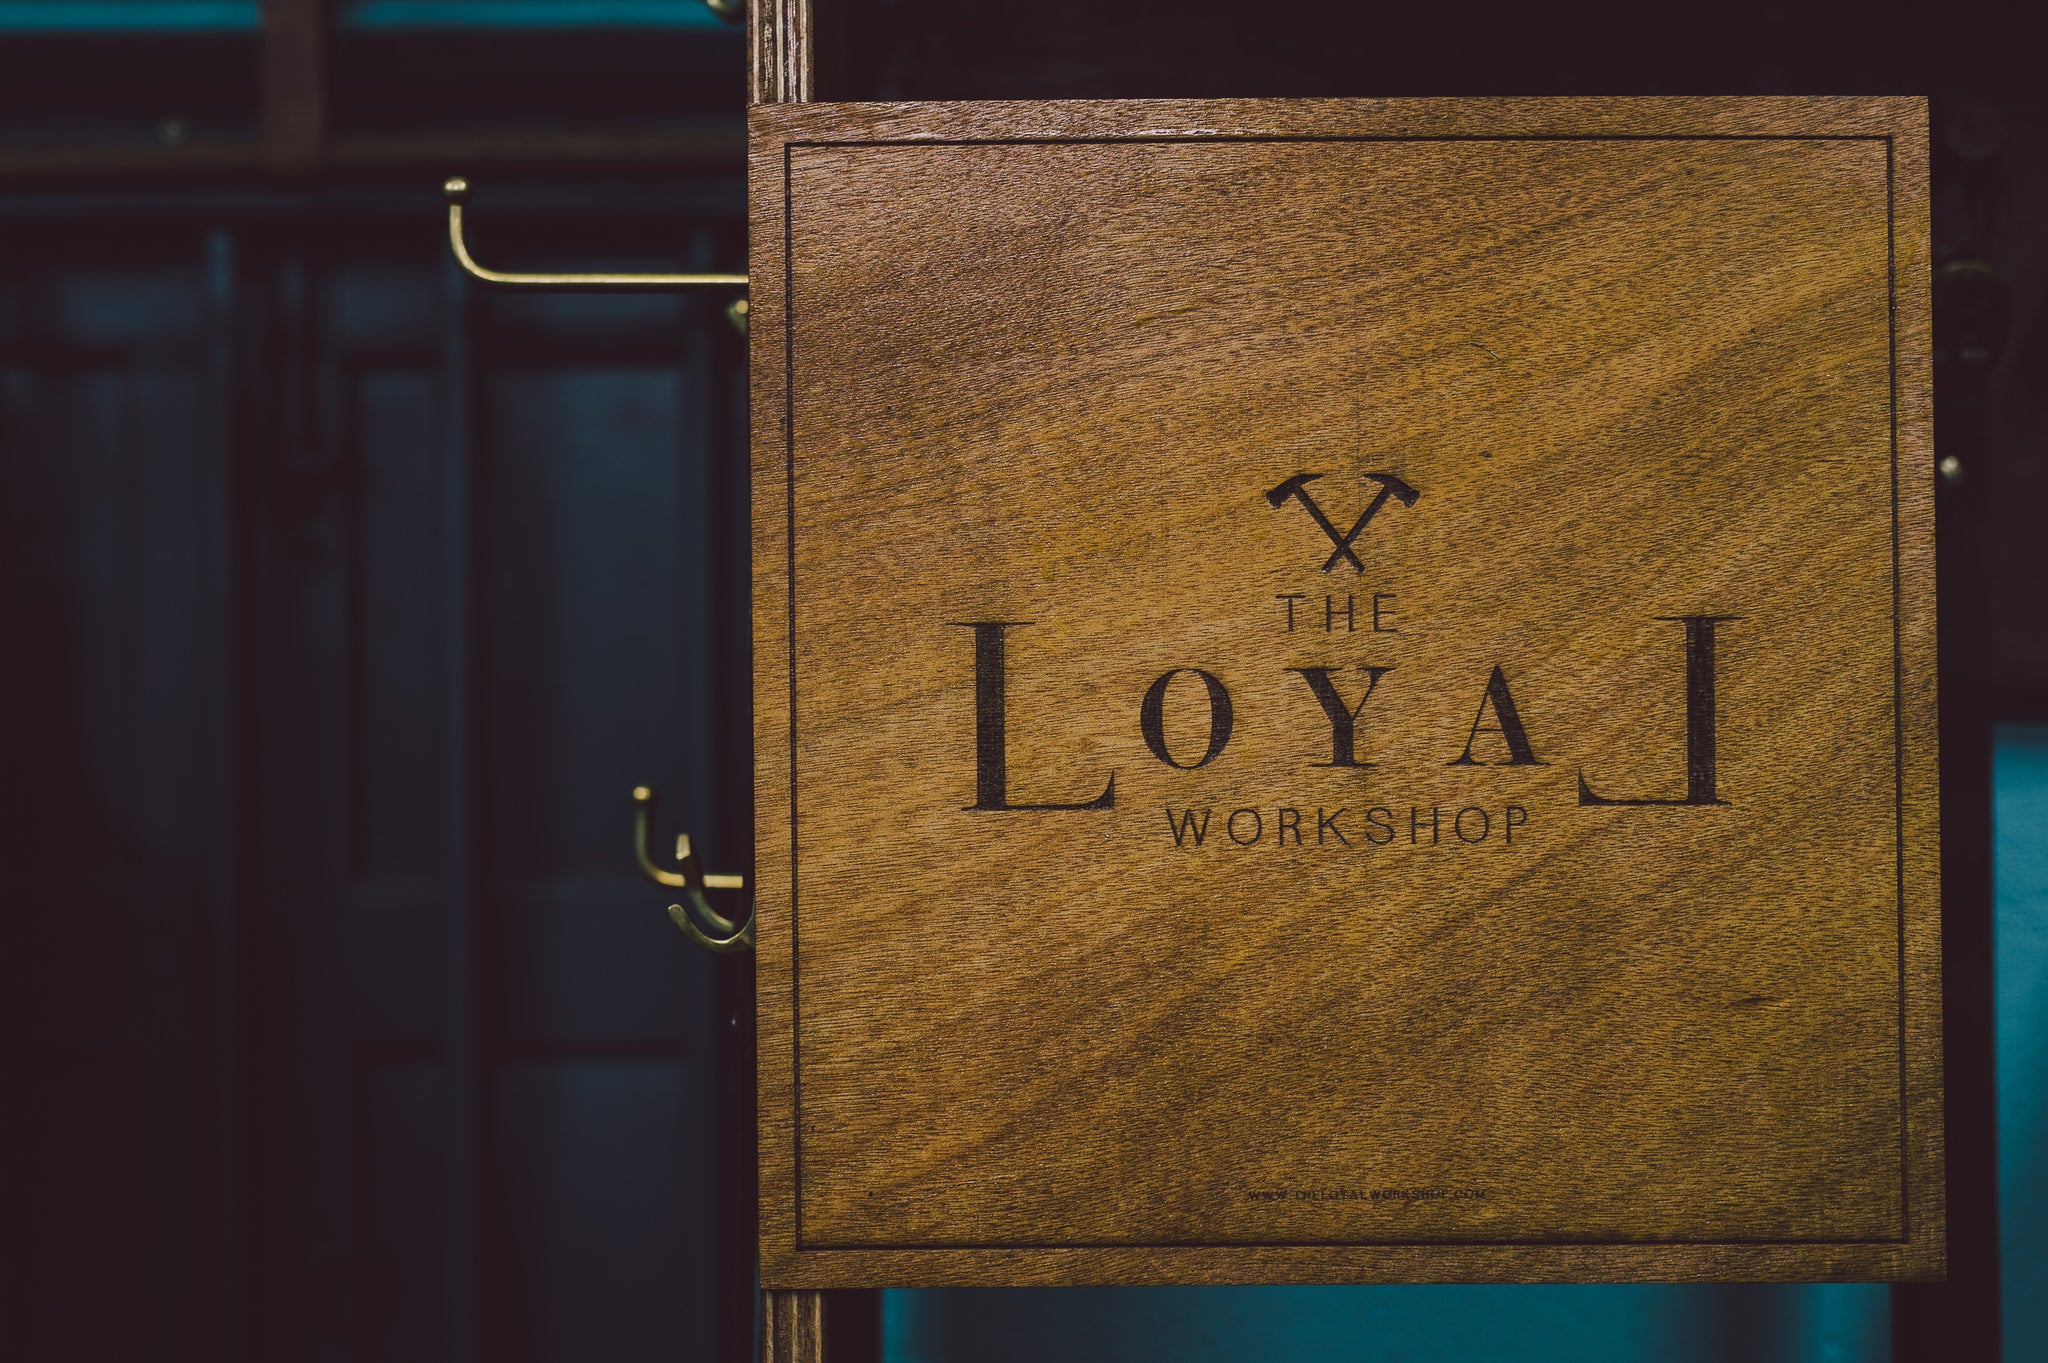 The Loyal Workshop Factory Sign